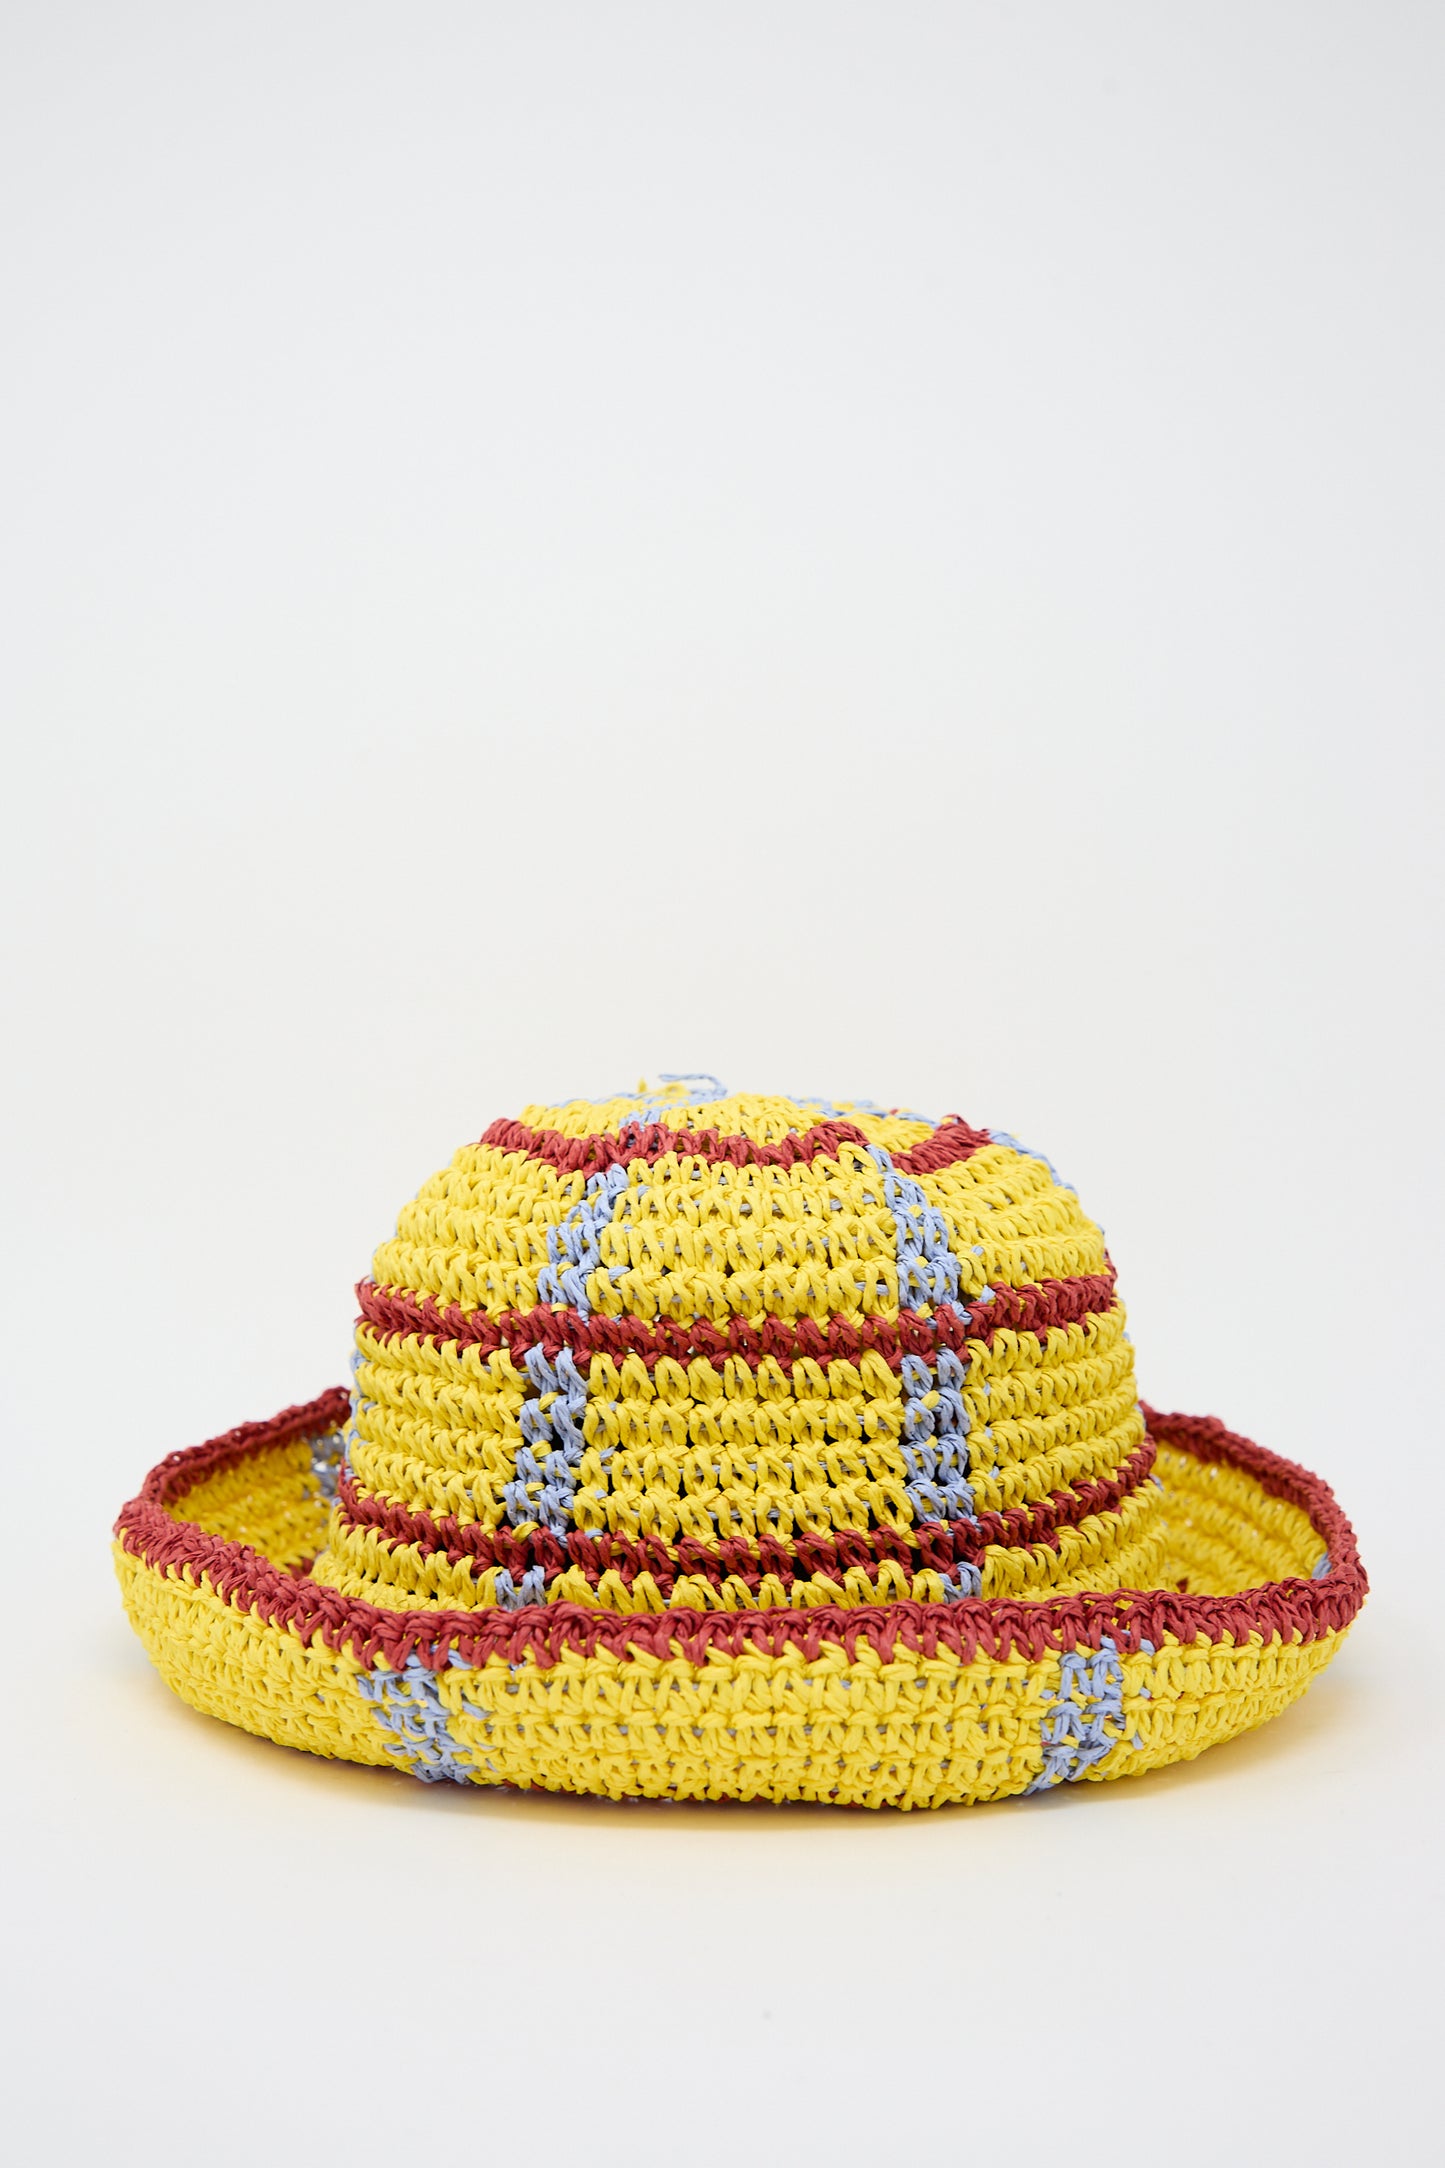 A colorful crocheted hat in yellow, red, and blue on a white background, designed by Reinhard Plank.